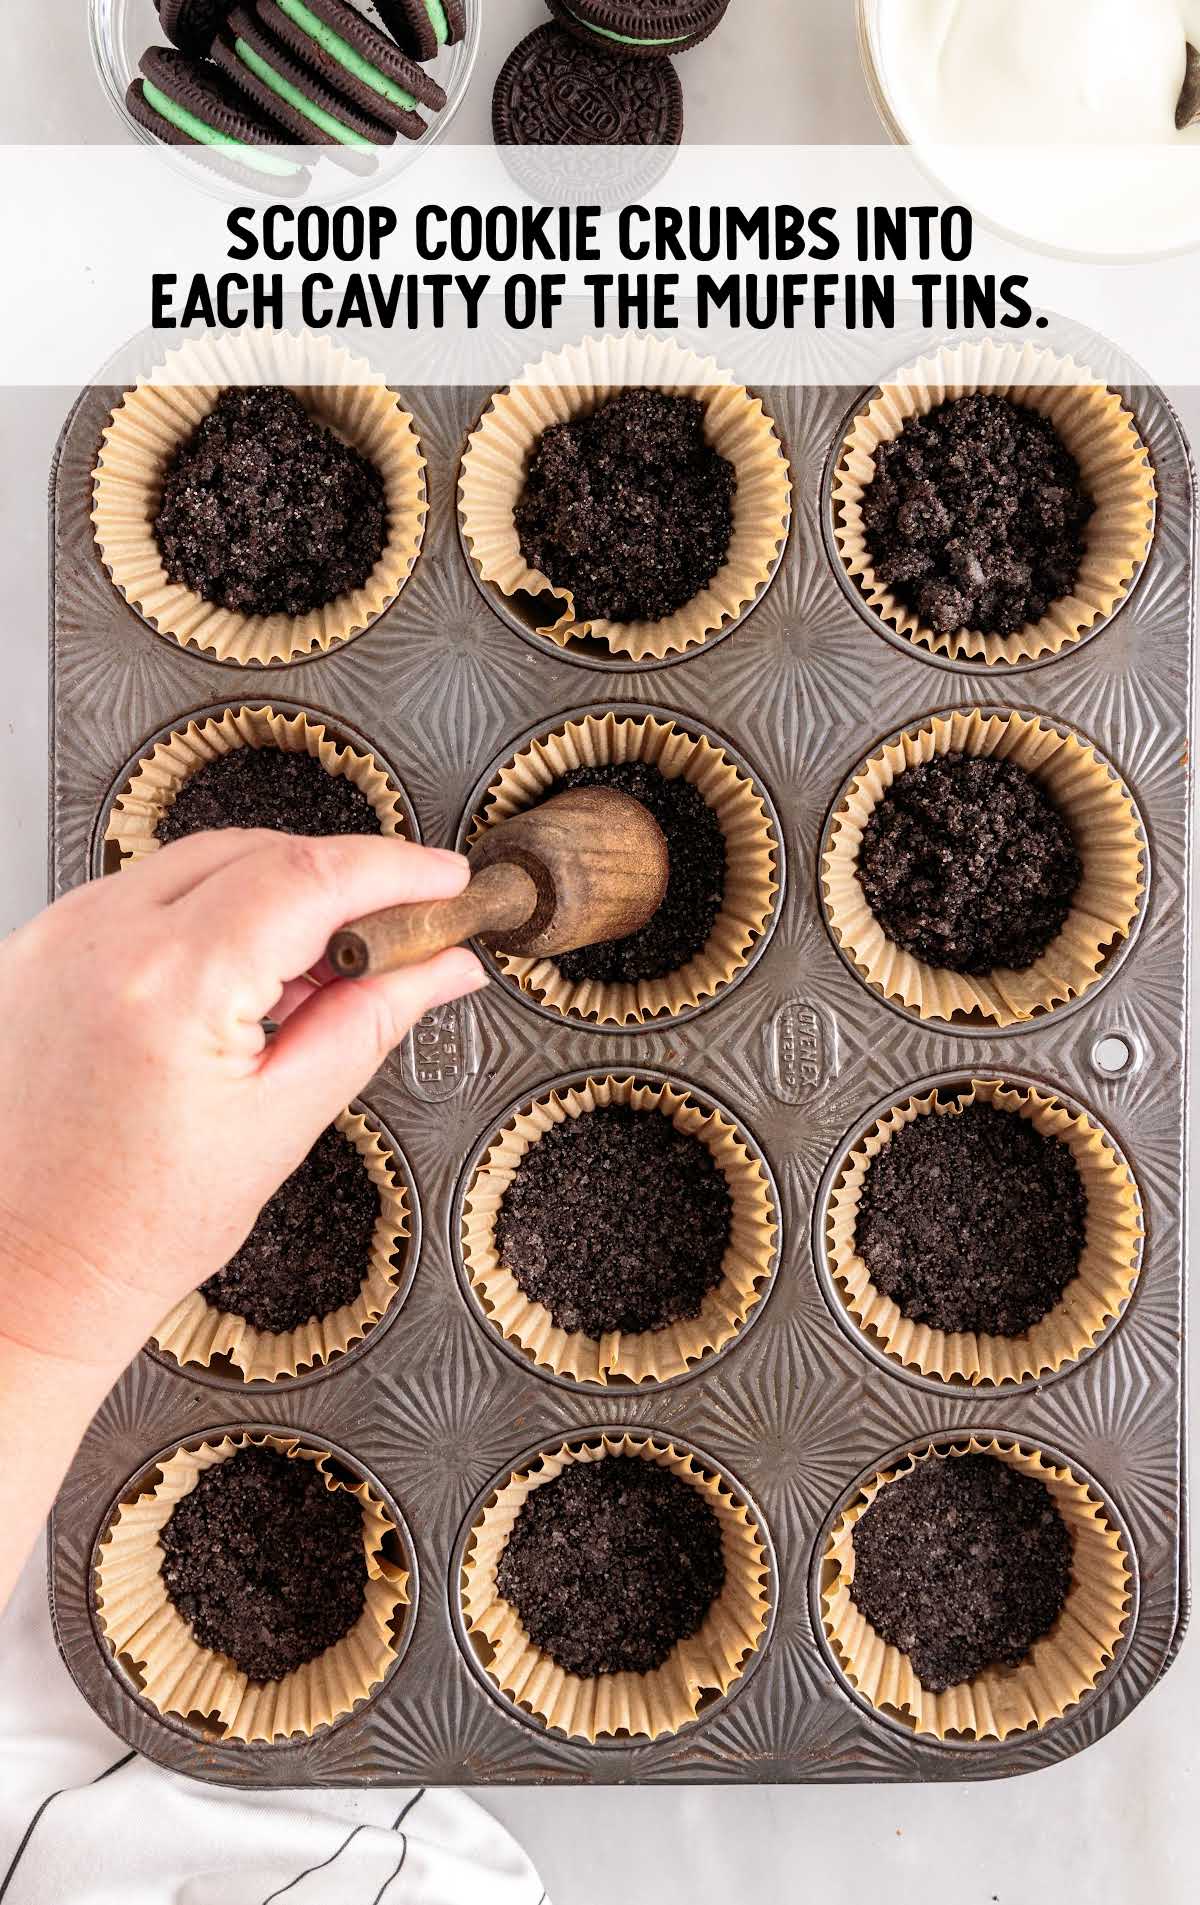 cookie crumbs scooped into each cavity of the muffin tins